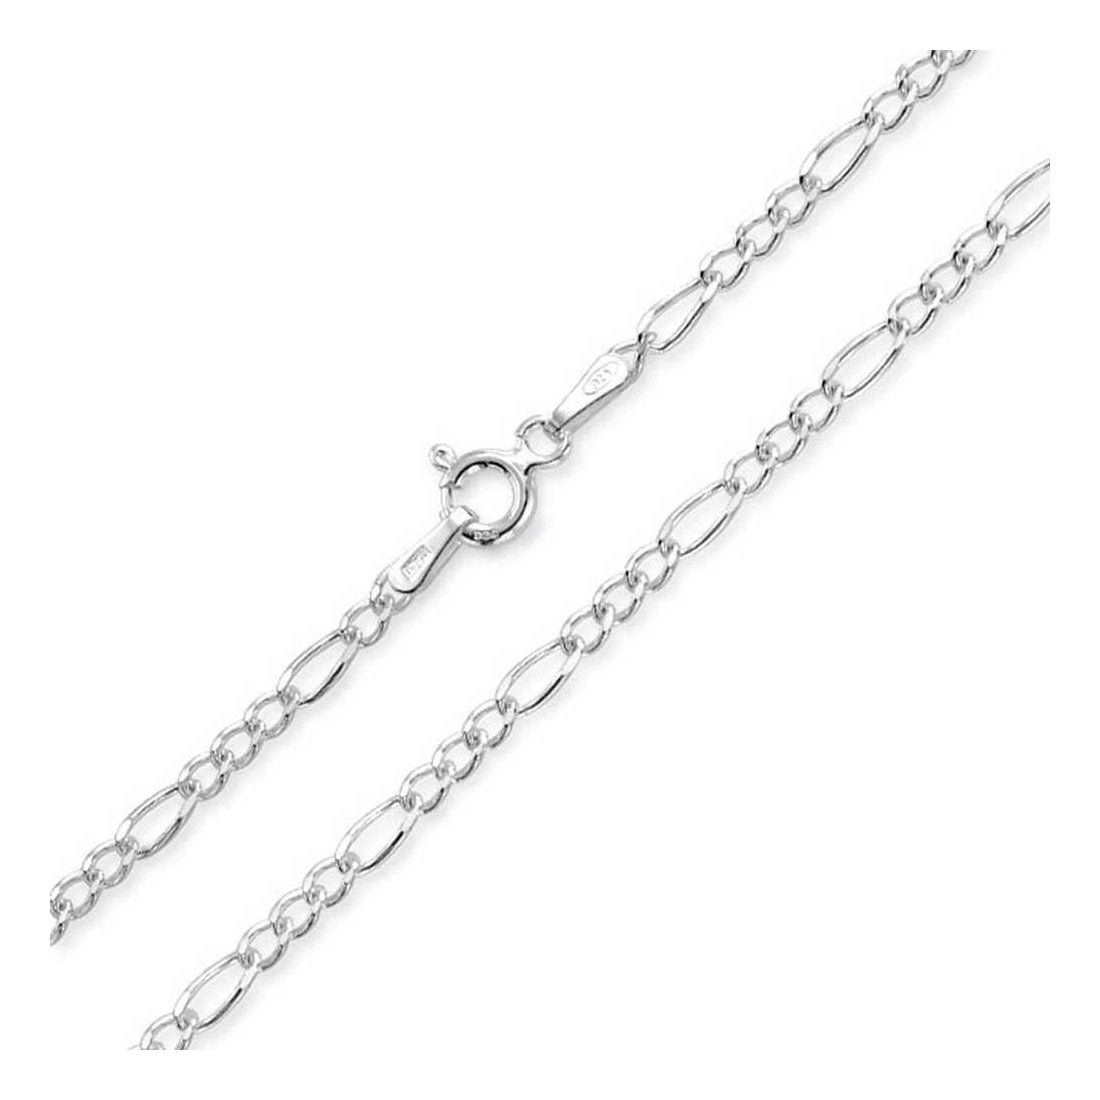 4MM 100 Figaro Link Chain .925 Solid Sterling Silver Sizes 7"-36" Inches